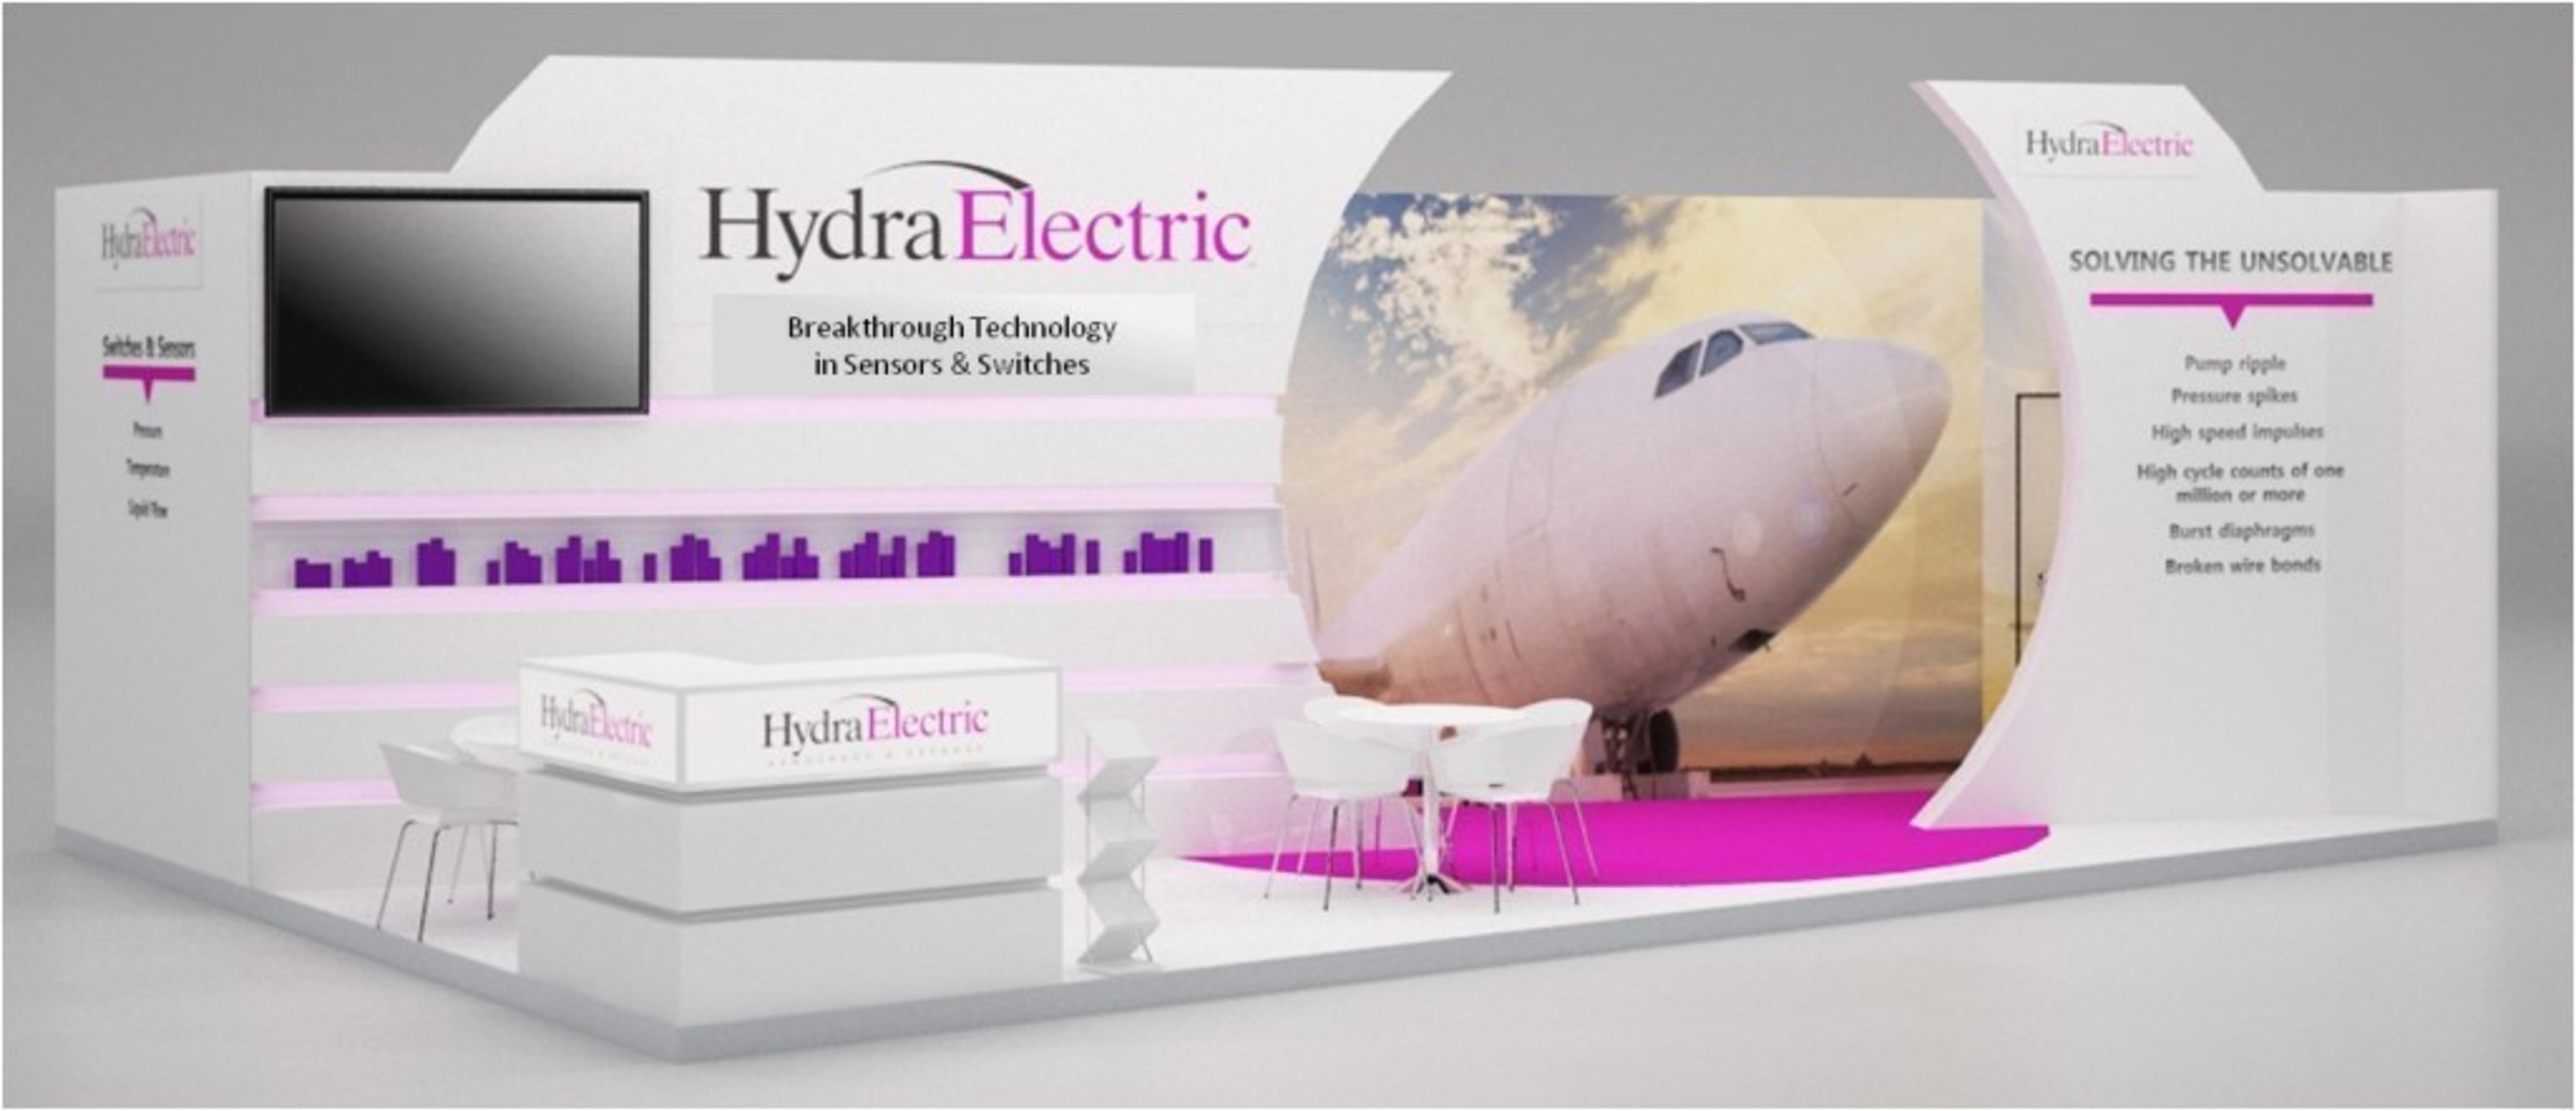 Hydra-Electric Company, a provider of breakthrough sensing technology for the aerospace industry, will exhibit at the 51st International Paris Air Show (Hall 5, Stand C-249), where the company will be introducing new high performance sensor and switch solutions at the world's largest aerospace trade show.